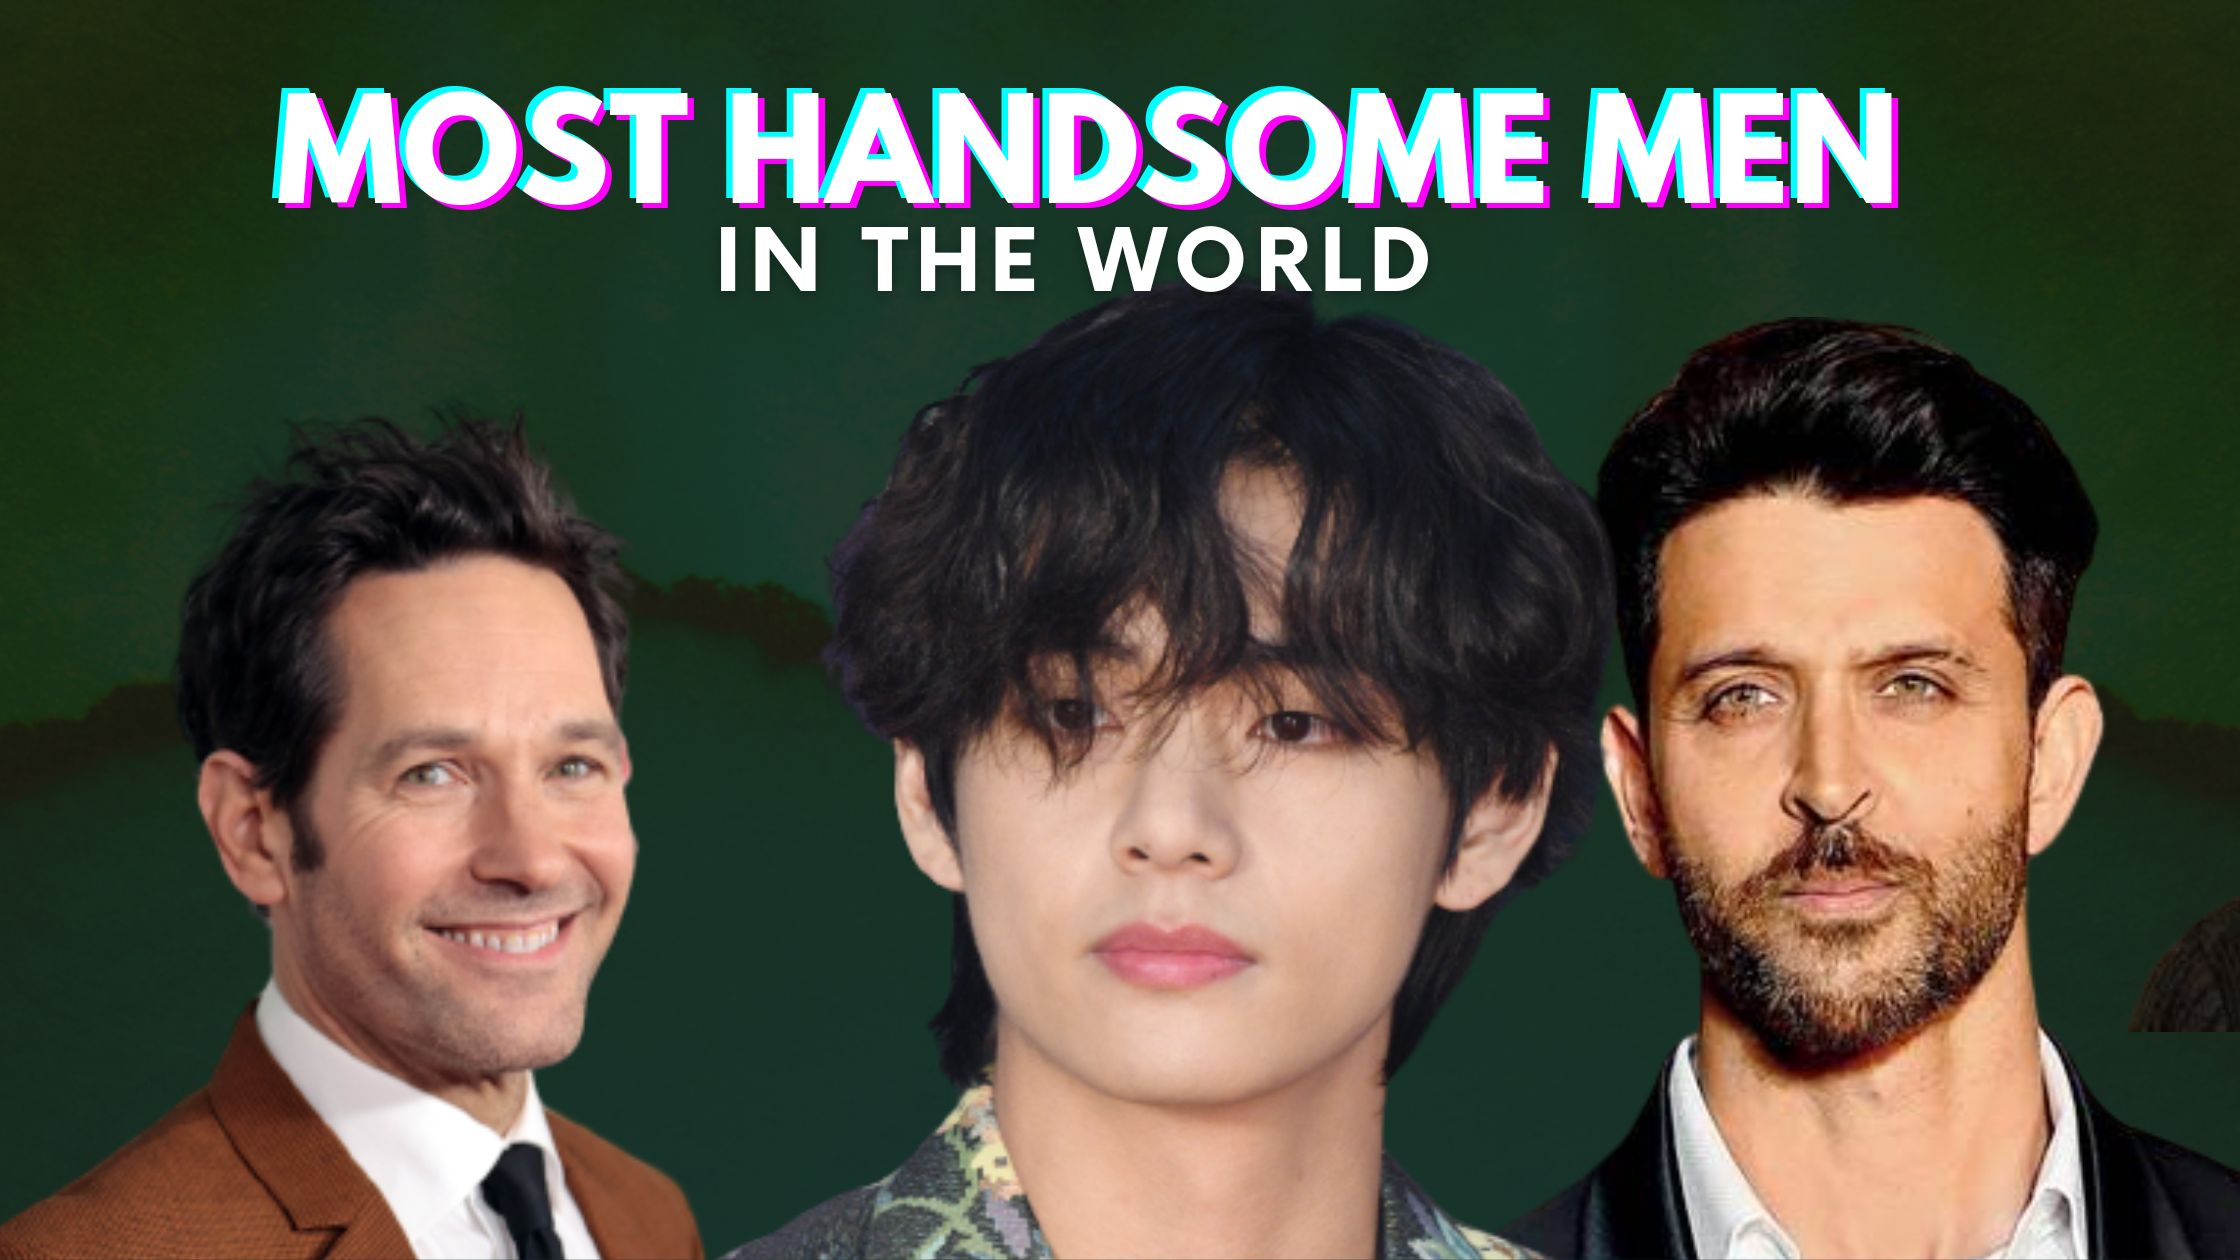 Top 10 Most Handsome Men In The World (2022)